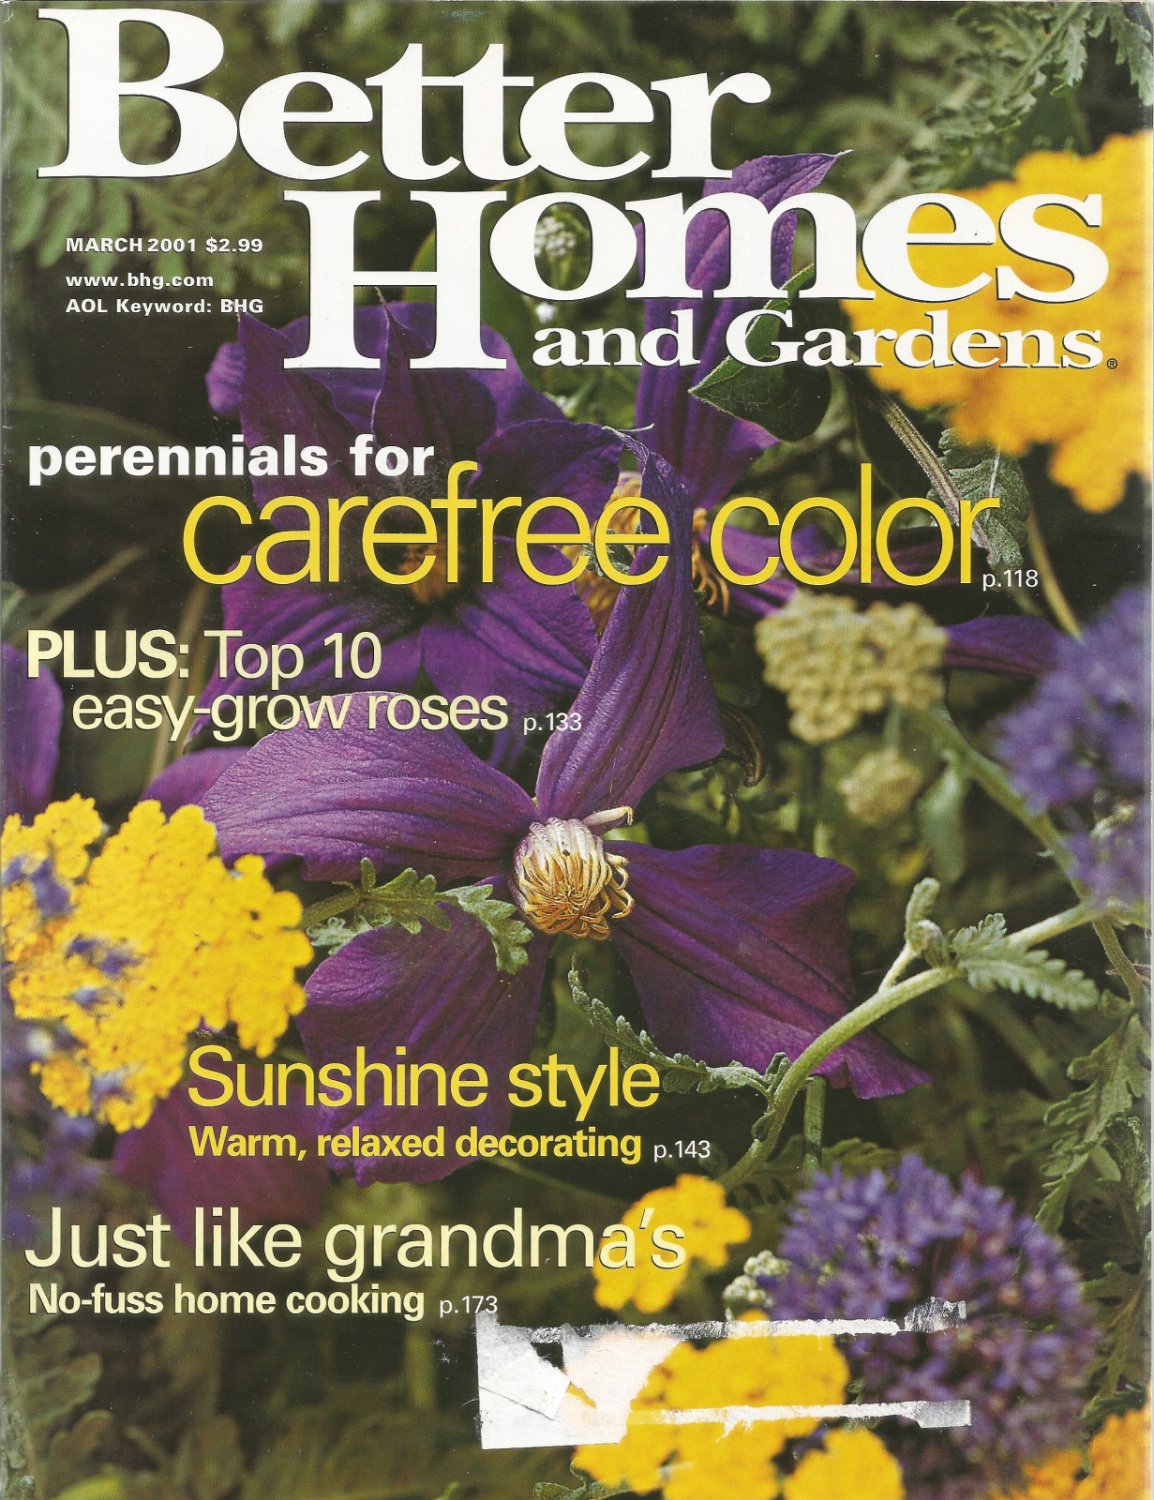 Better Homes and Gardens March 2001 perennials for carefree color